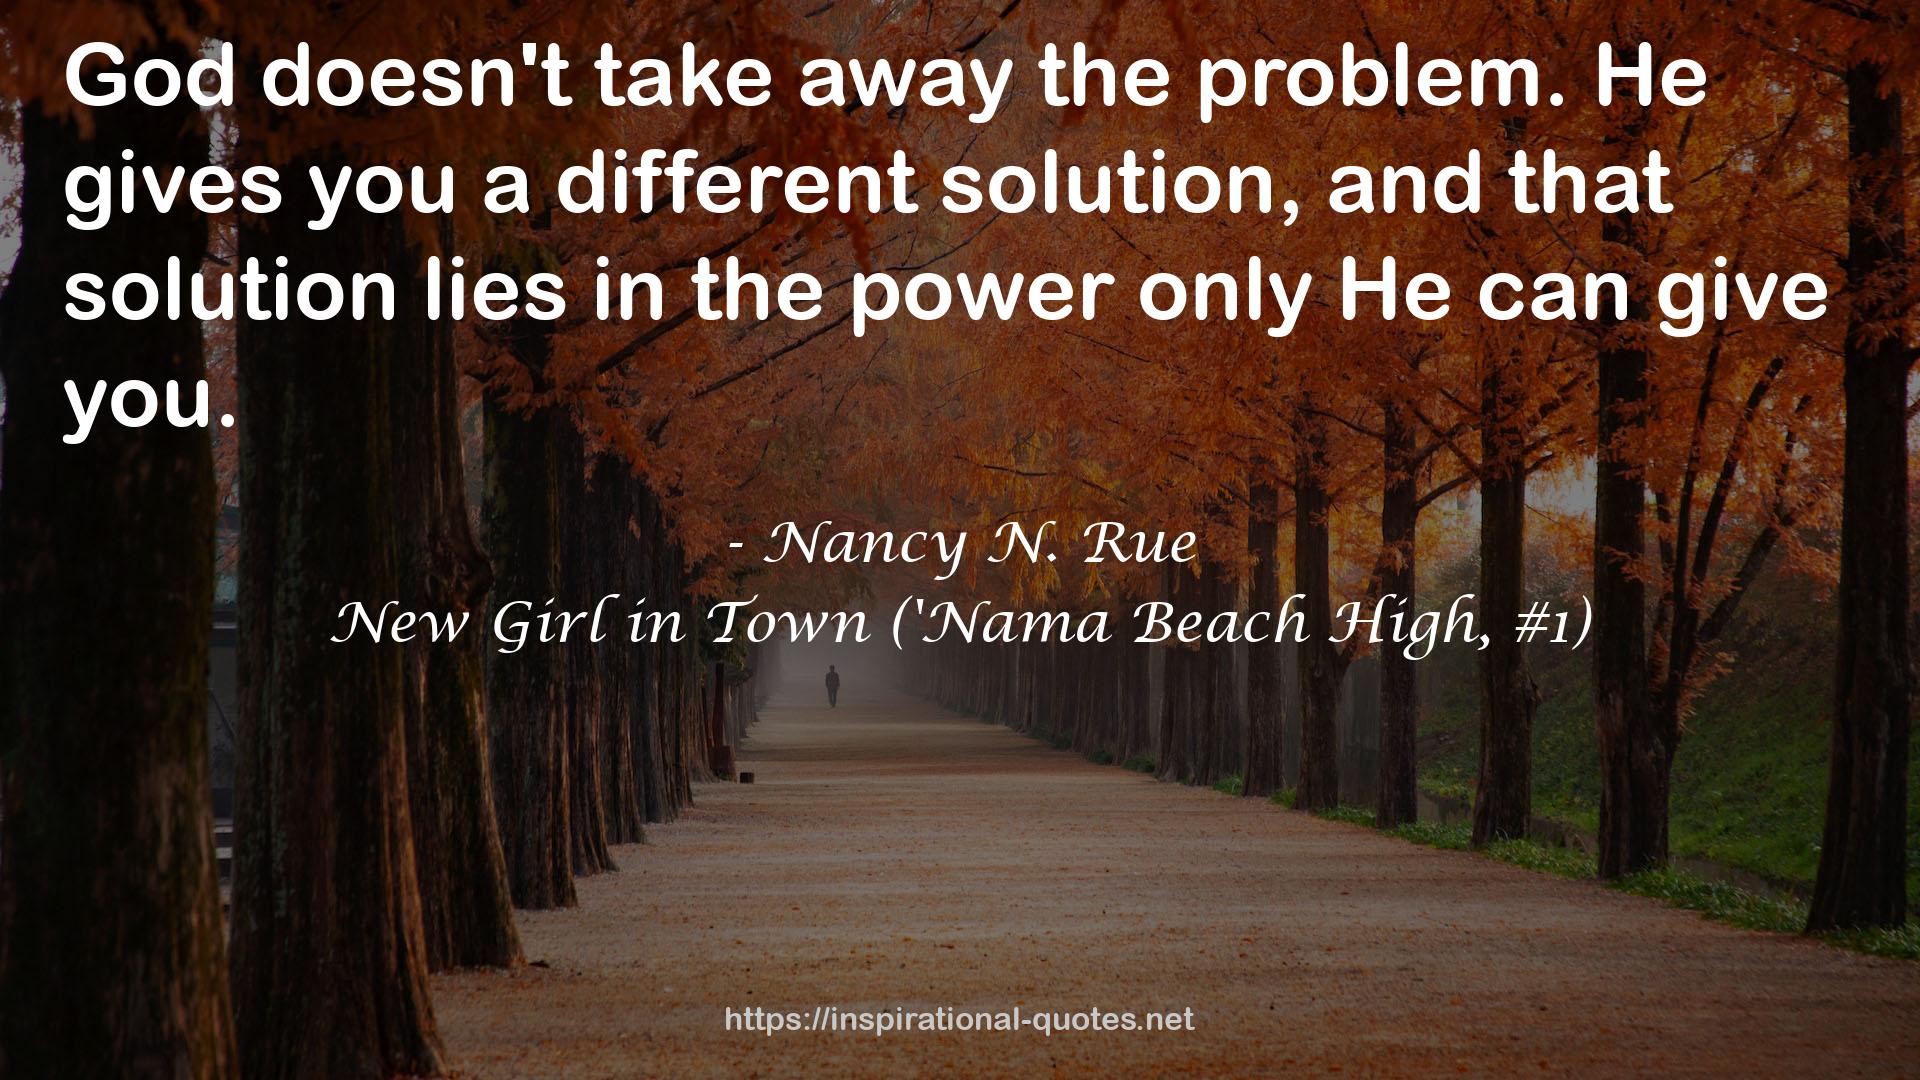 New Girl in Town ('Nama Beach High, #1) QUOTES